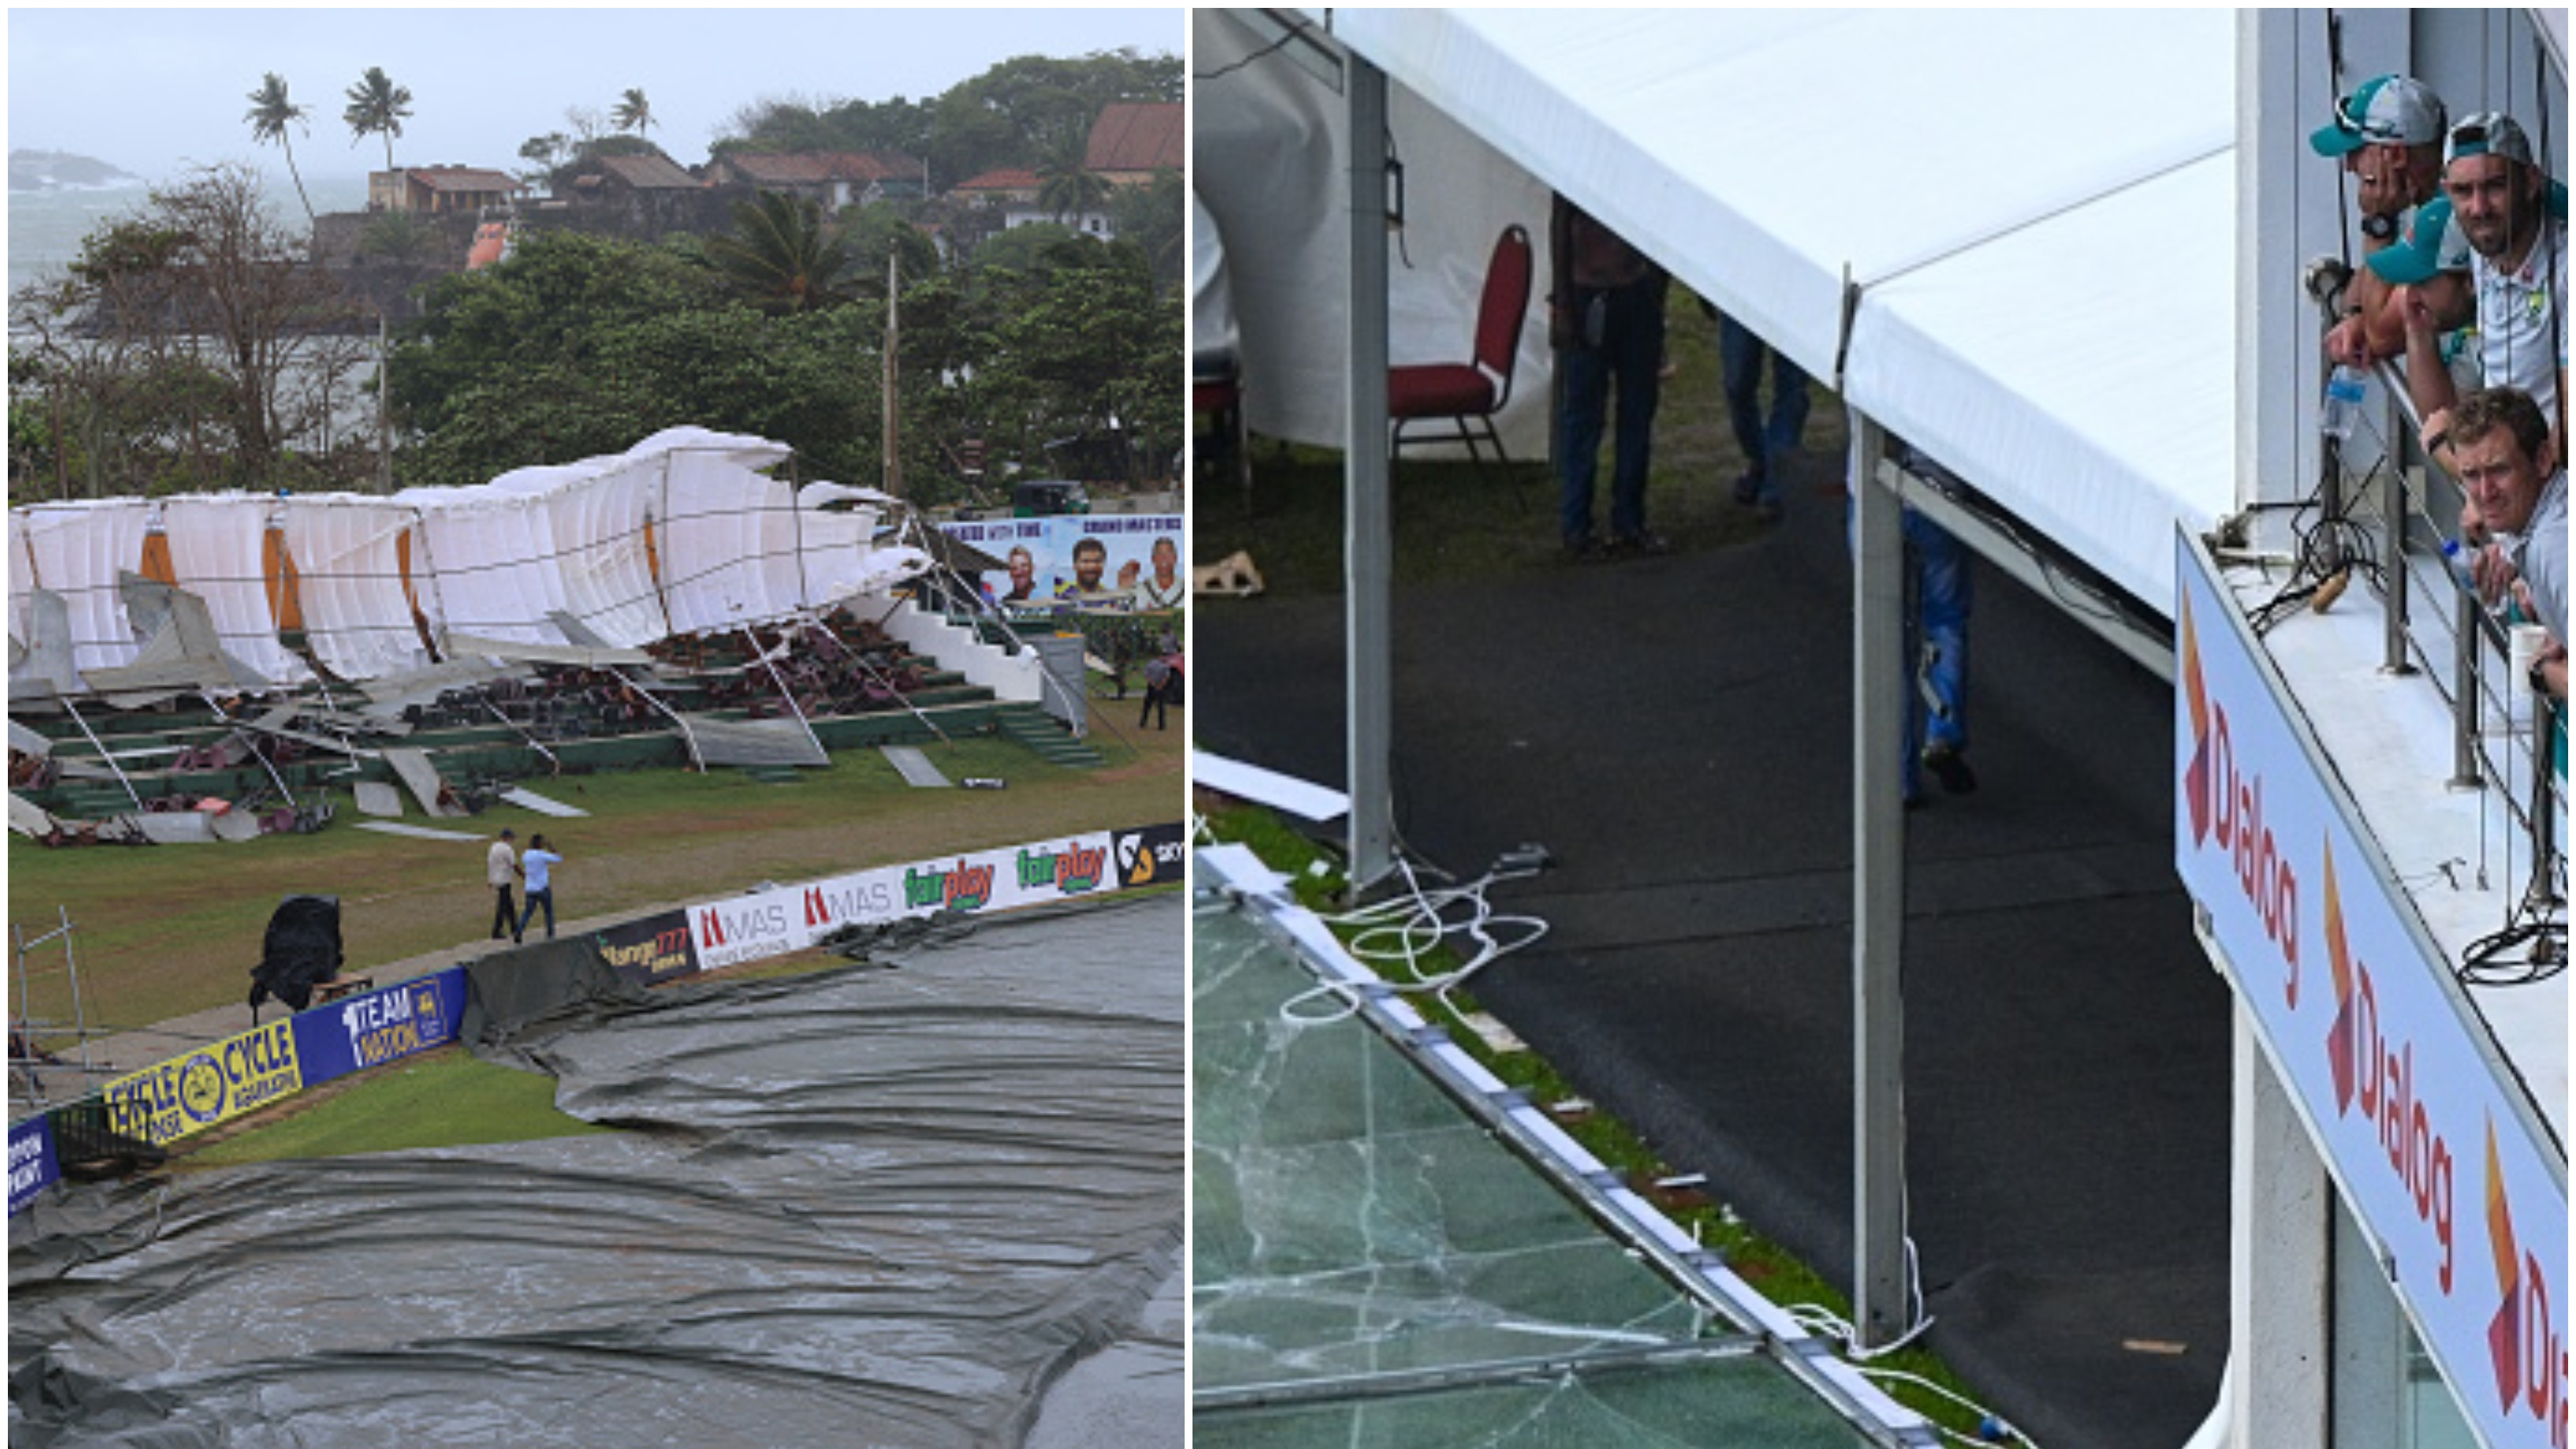 SL v AUS 2022: WATCH – Makeshift stand collapses, glass panel falls as inclement weather causes havoc at Galle